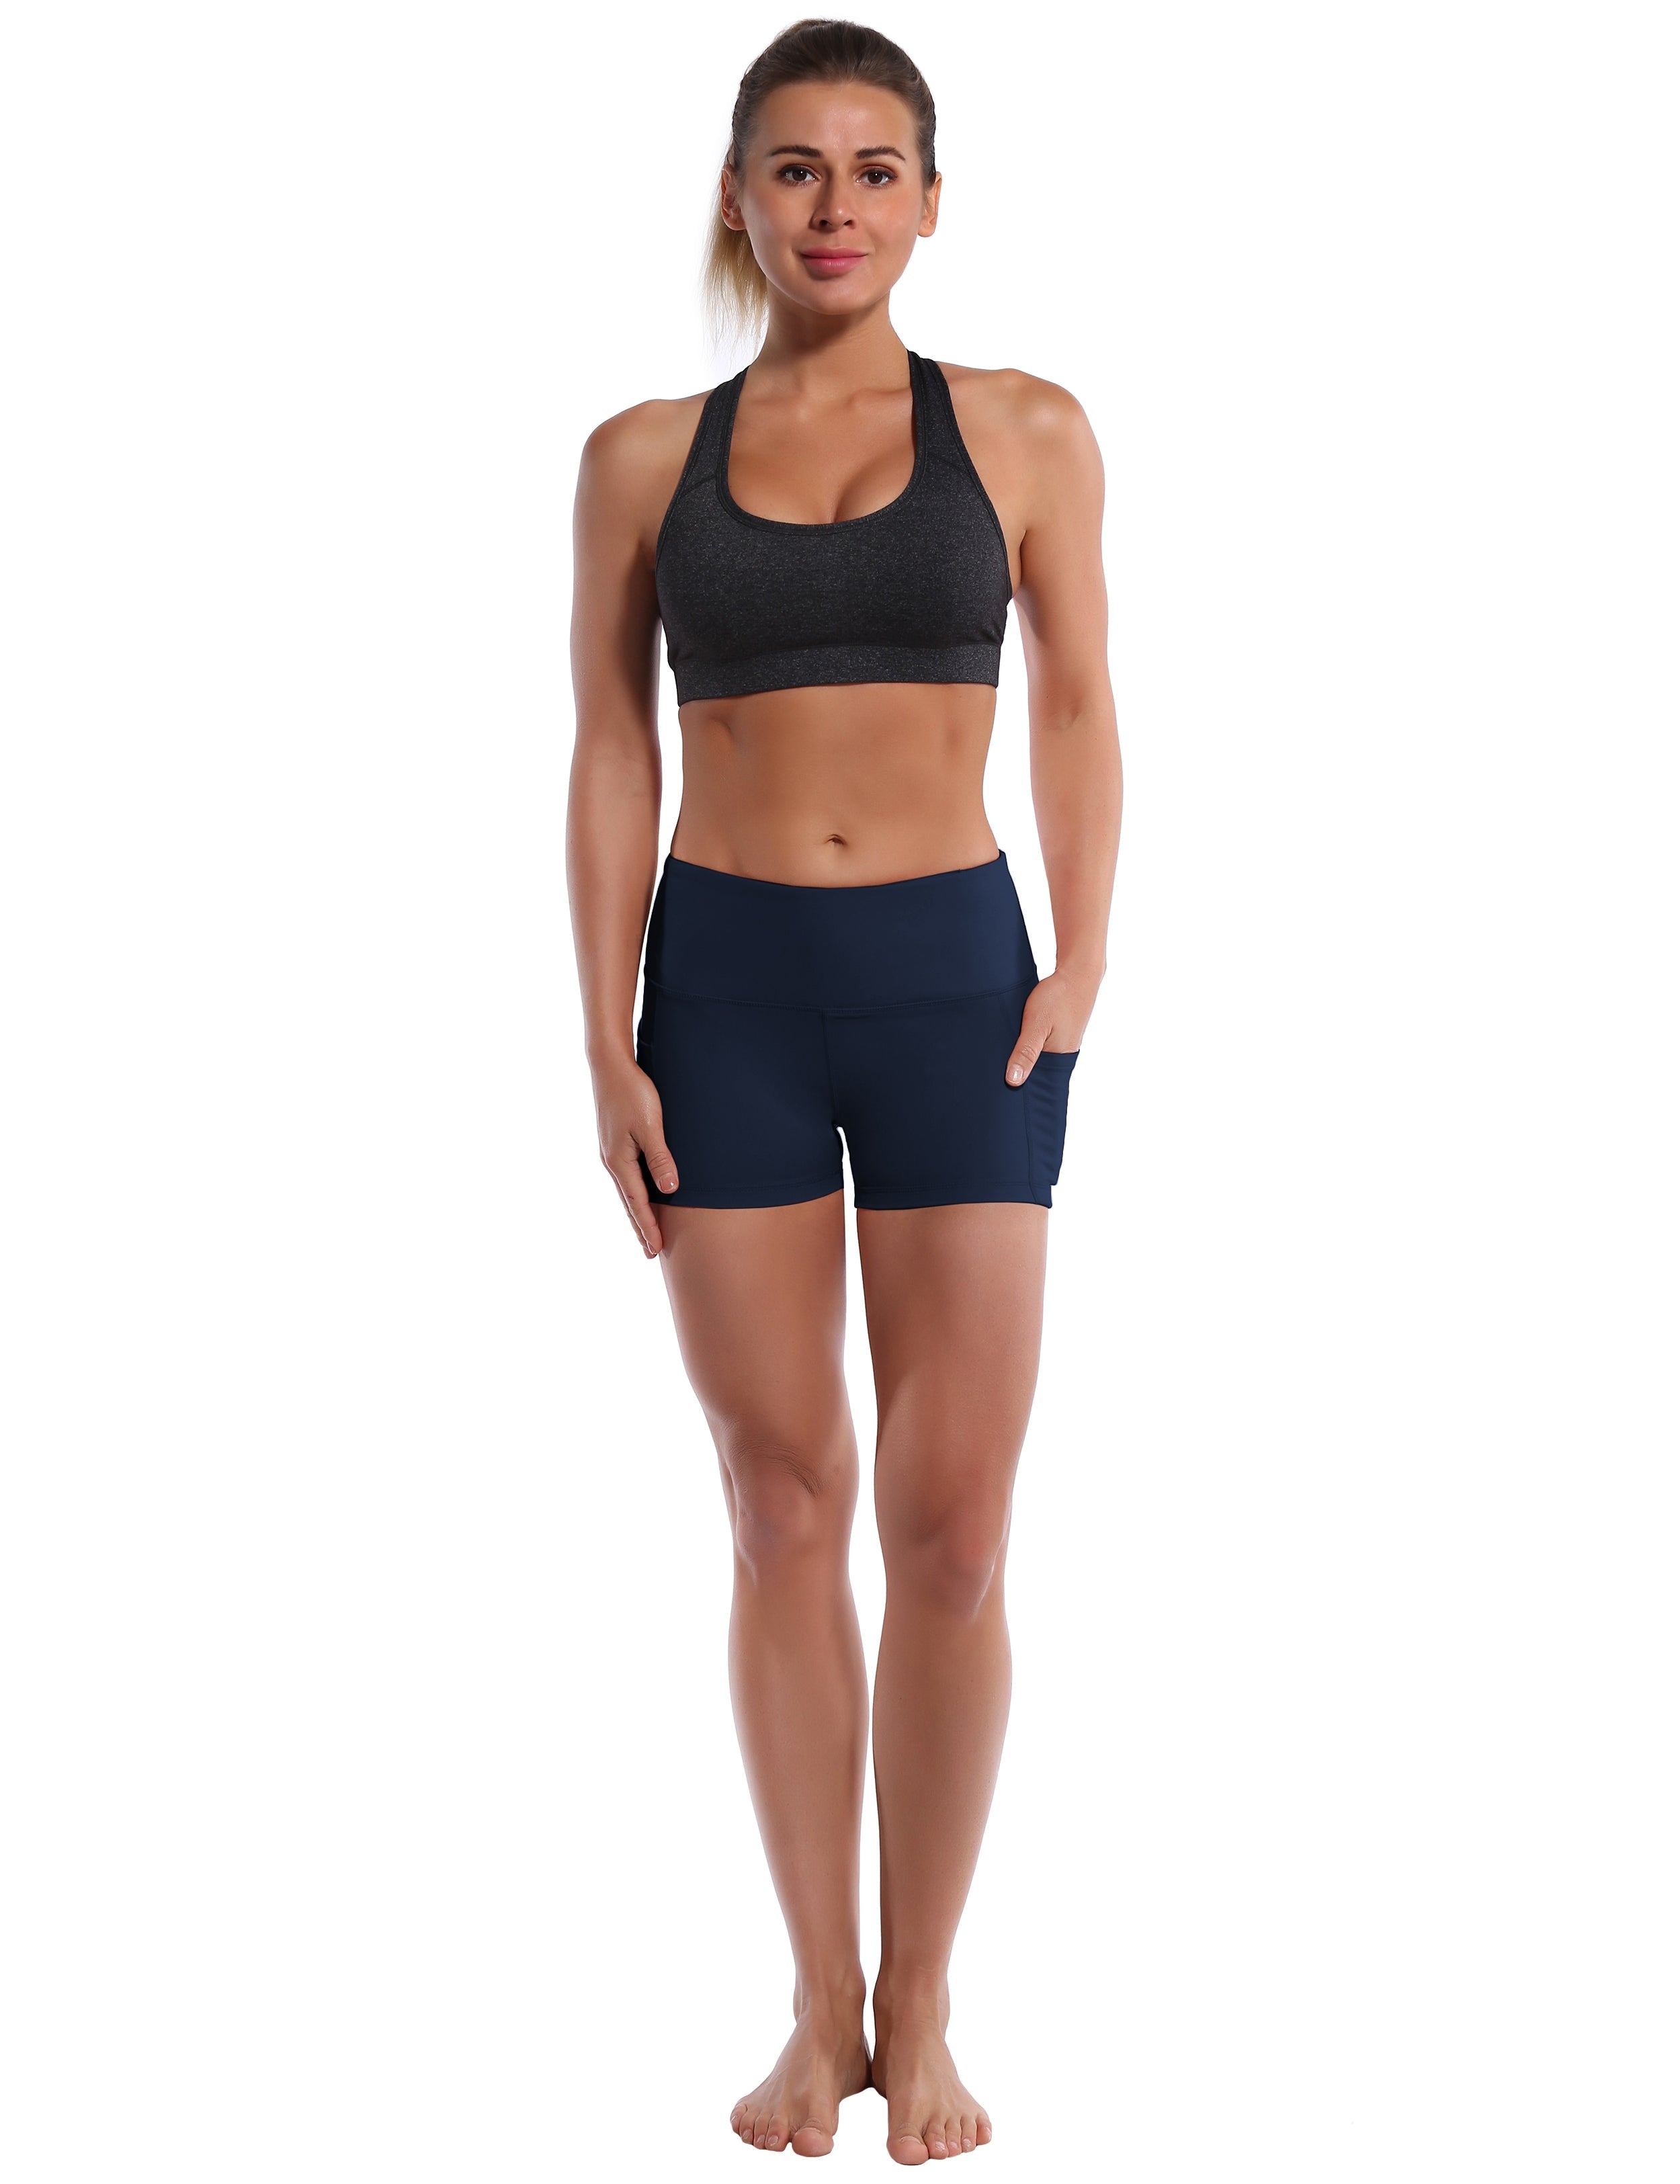 2.5" Side Pockets Gym Shorts darknavy Sleek, soft, smooth and totally comfortable: our newest sexy style is here. Softest-ever fabric High elasticity High density 4-way stretch Fabric doesn't attract lint easily No see-through Moisture-wicking Machine wash 78% Polyester, 22% Spandex